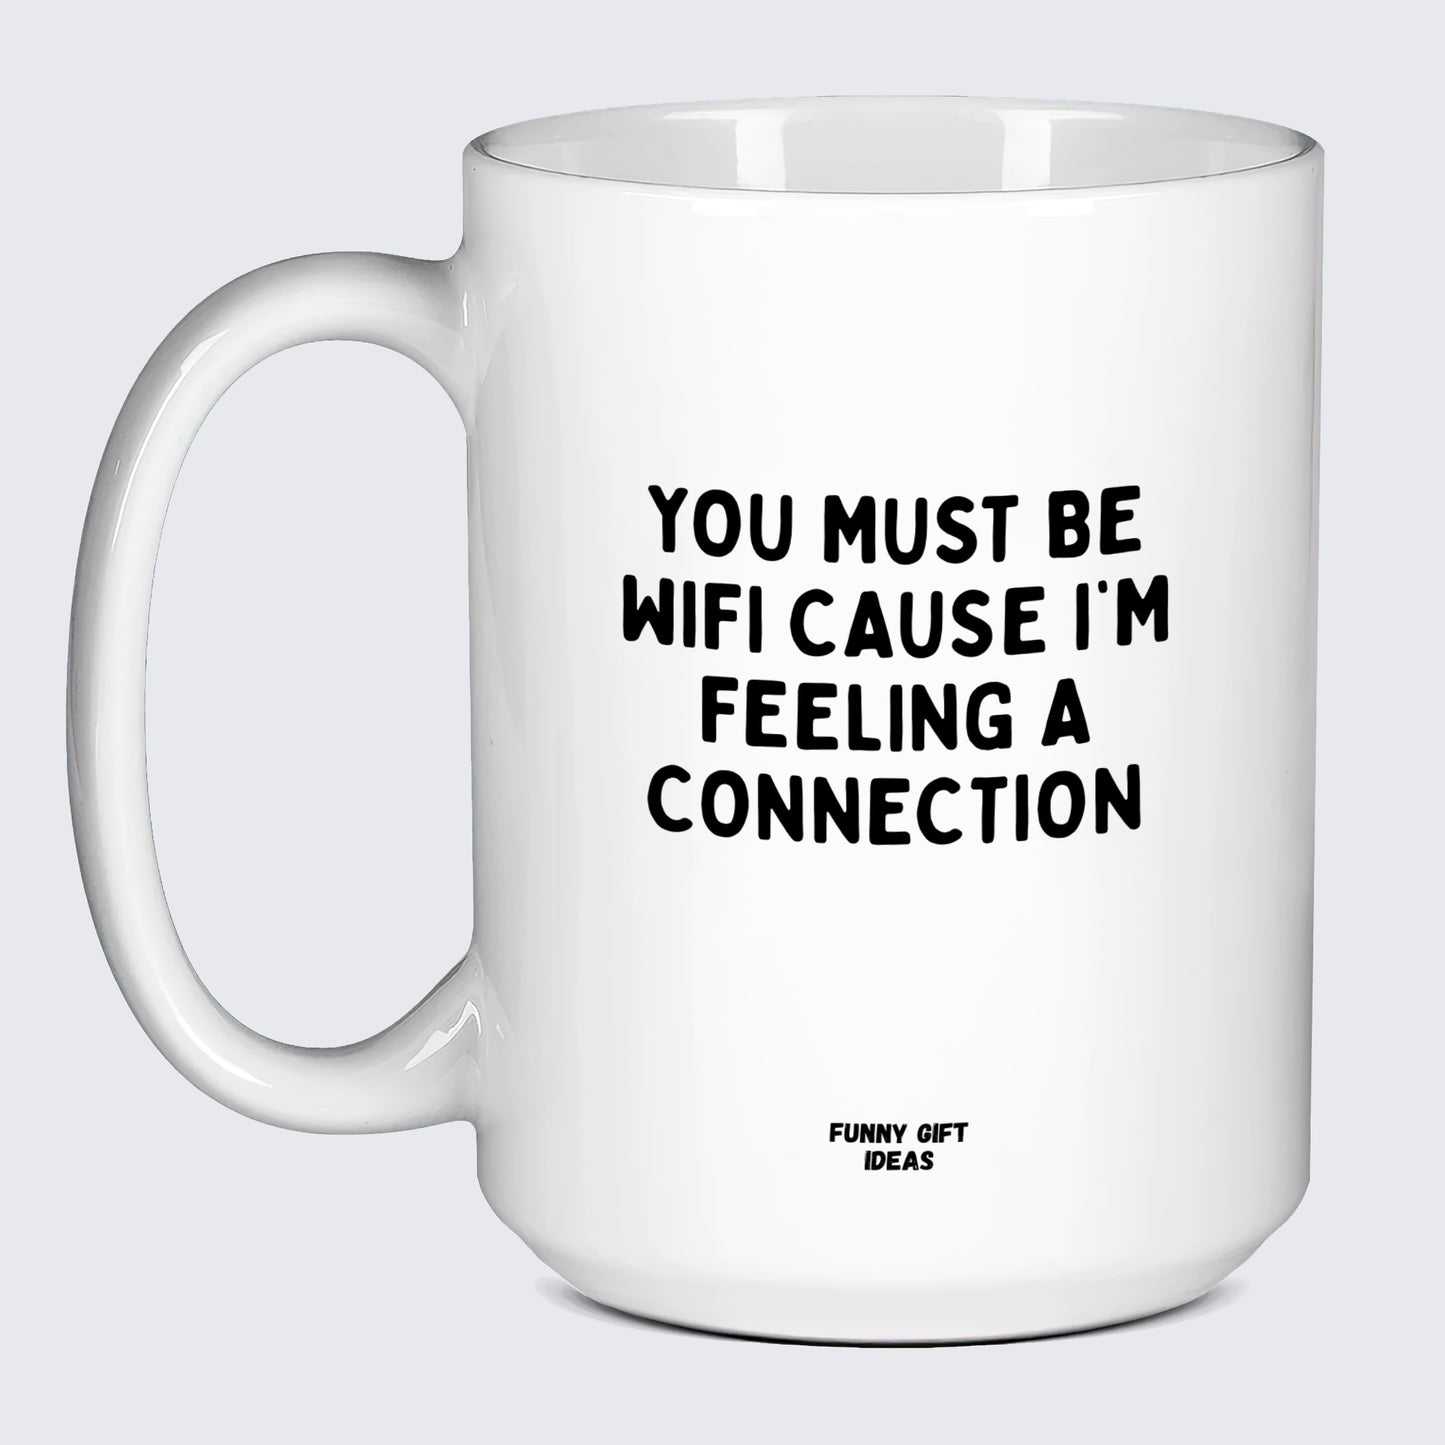 Anniversary Gifts for Her You Must Be Wifi Cause I'm Feeling a Connection - Funny Gift Ideas